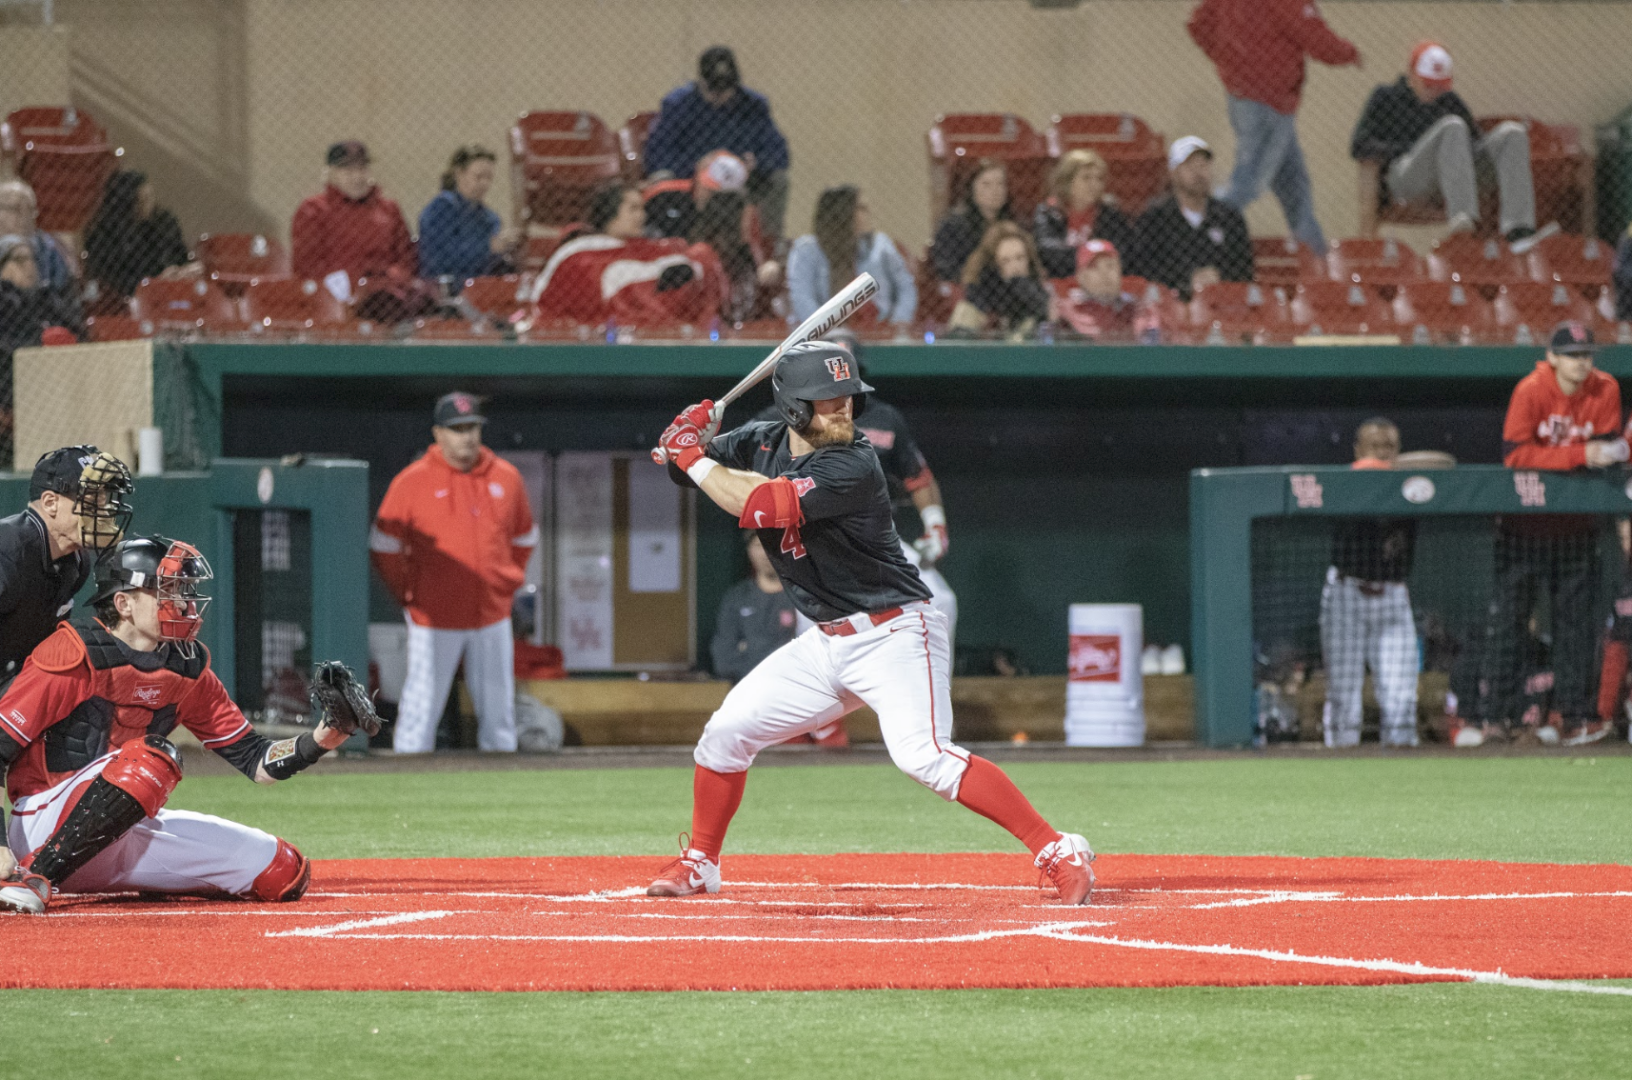 Senior Blake Way made his way to Houston in 2019 after two years playing JUCO, and last year’s Cougars welcomed him to the team with open arms. | Jhair Romero/The Cougar